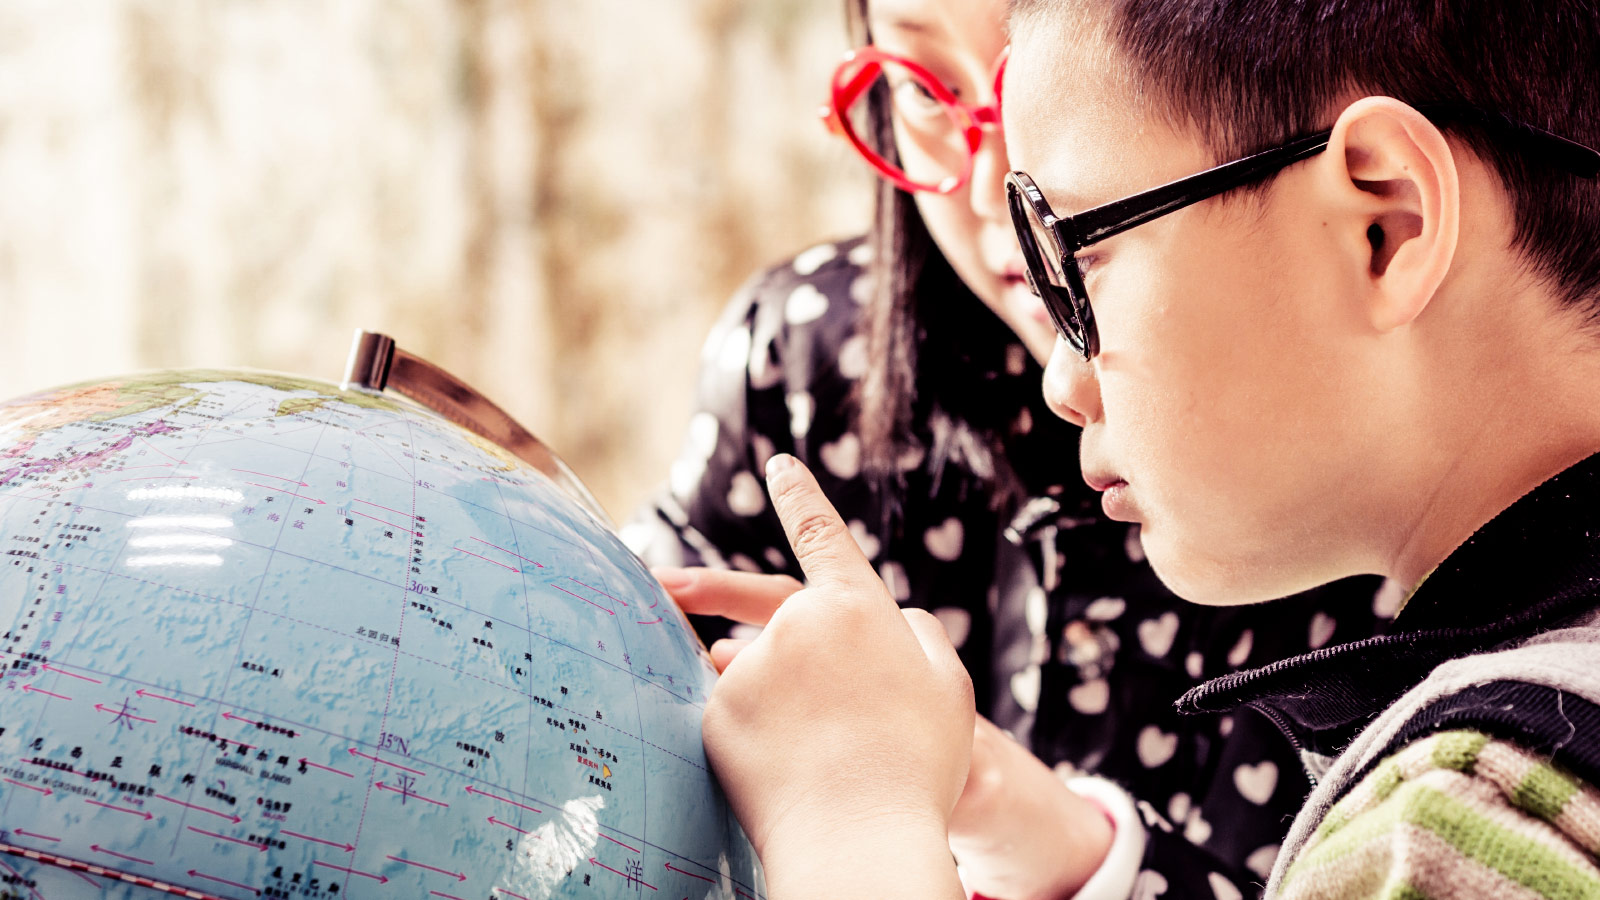 7 Considerations for Implementing Hands-On Learning in Social Studies